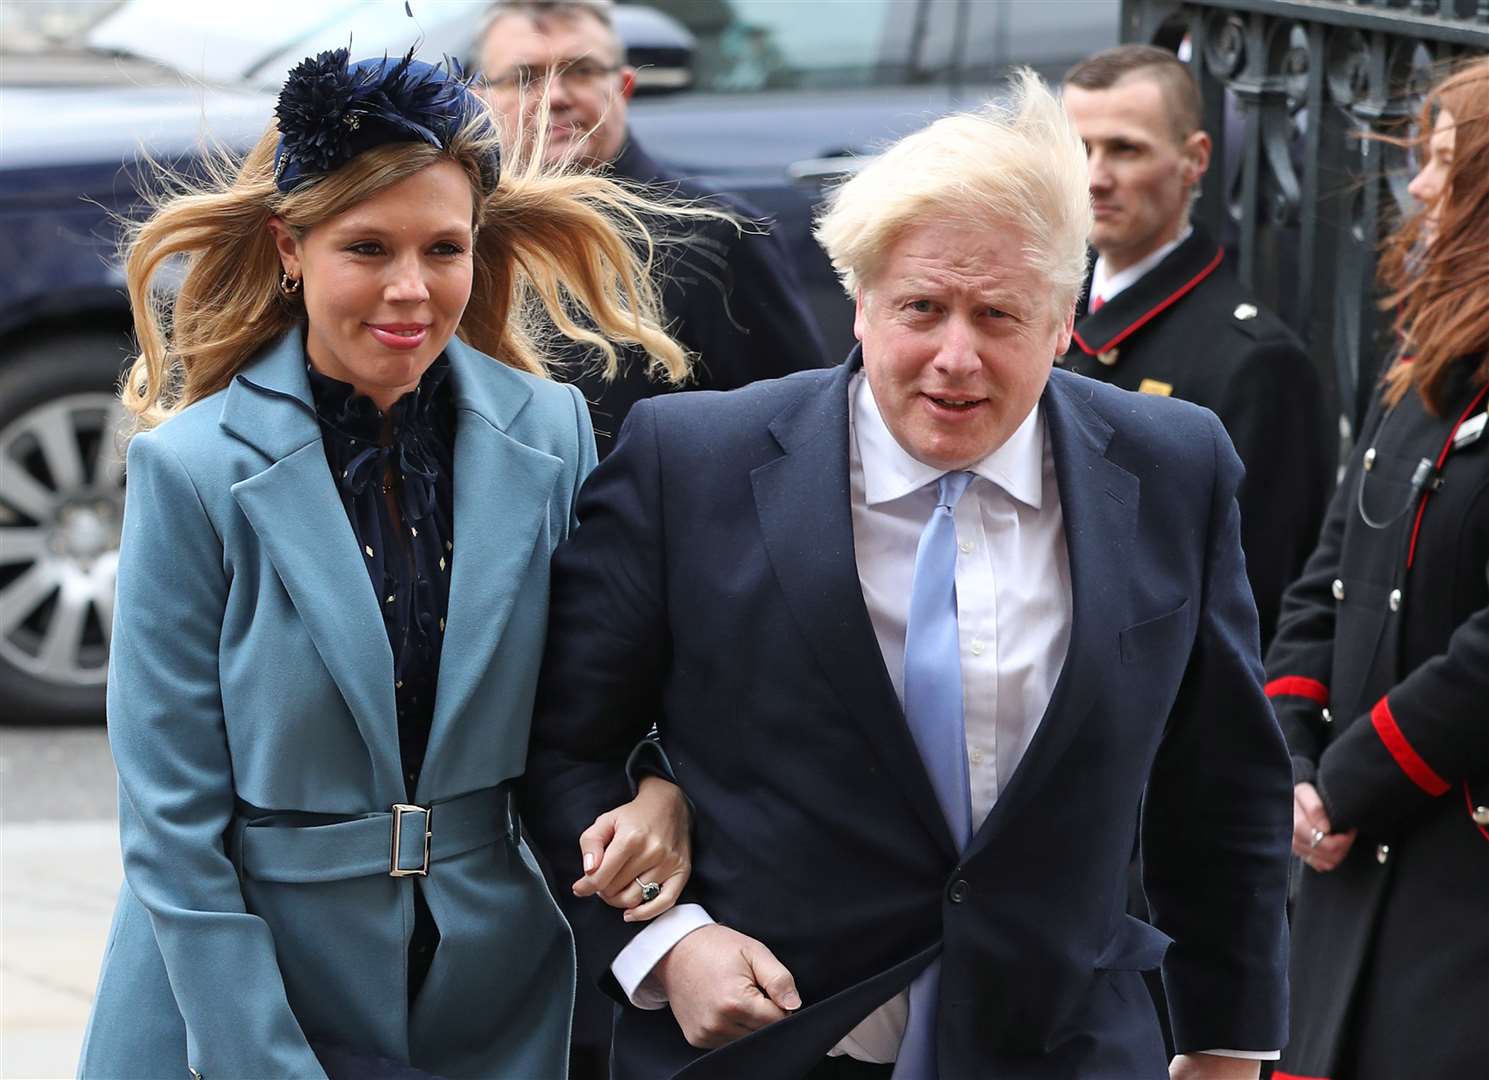 Boris Johnson and Carrie Symonds arrive at the Commonwealth Service at Westminster Abbey in March (Yui Mok/PA)